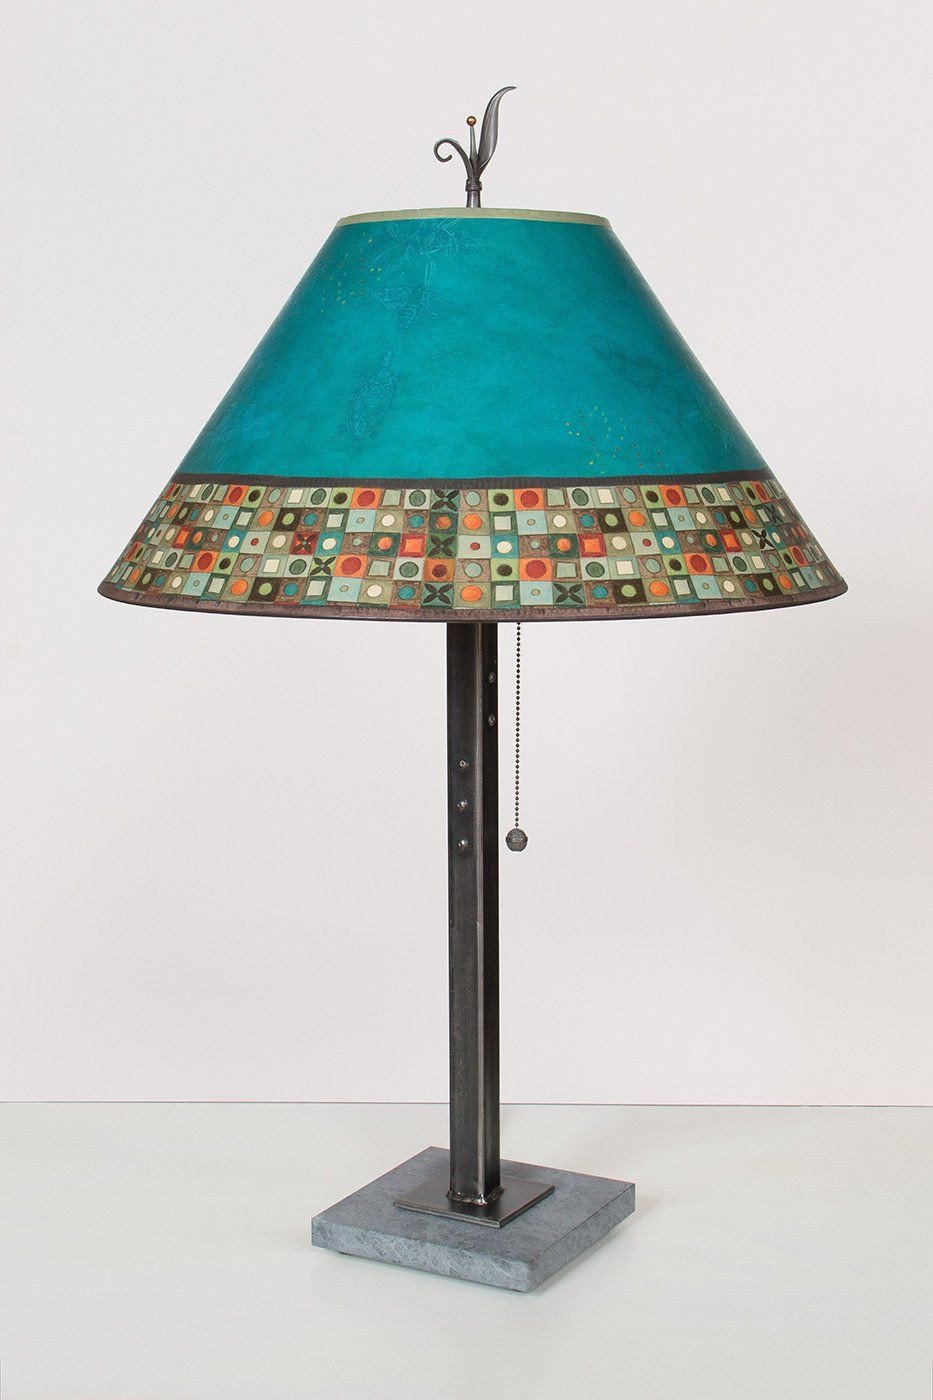 Steel Table Lamp on Italian Marble with Large Conical Shade in Jade Mosaic